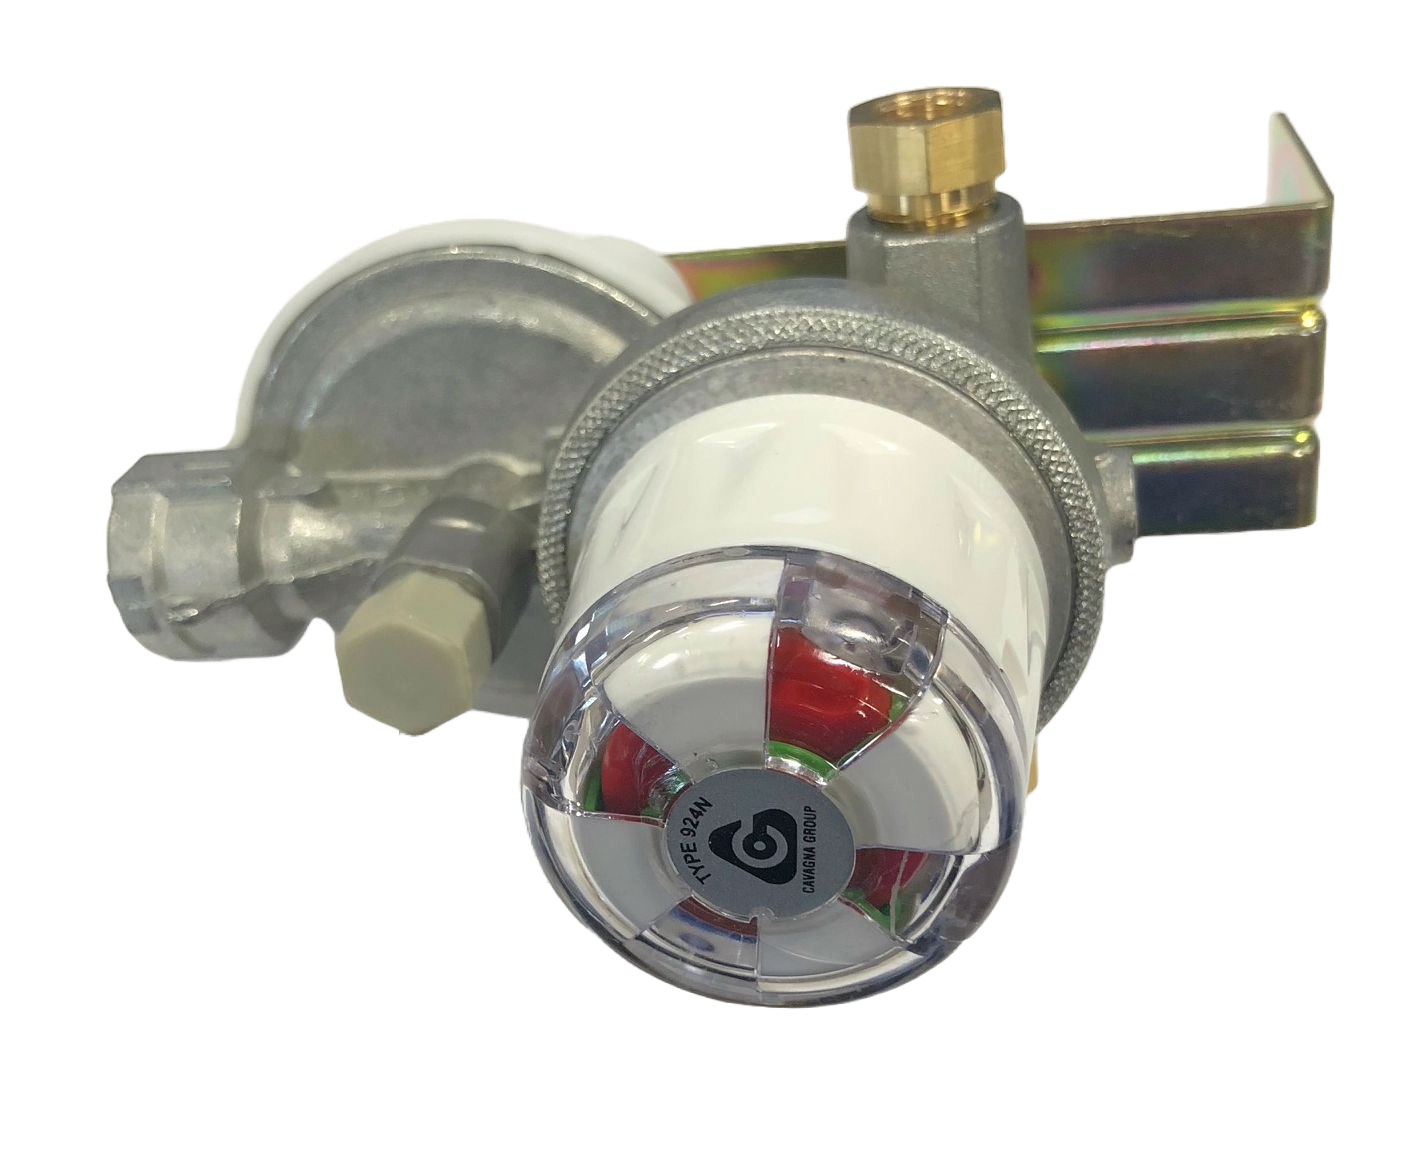 Cavagna 924N 2-Stage Auto Changeover Propane Regulator Kit with Cover and Mounting Bracket